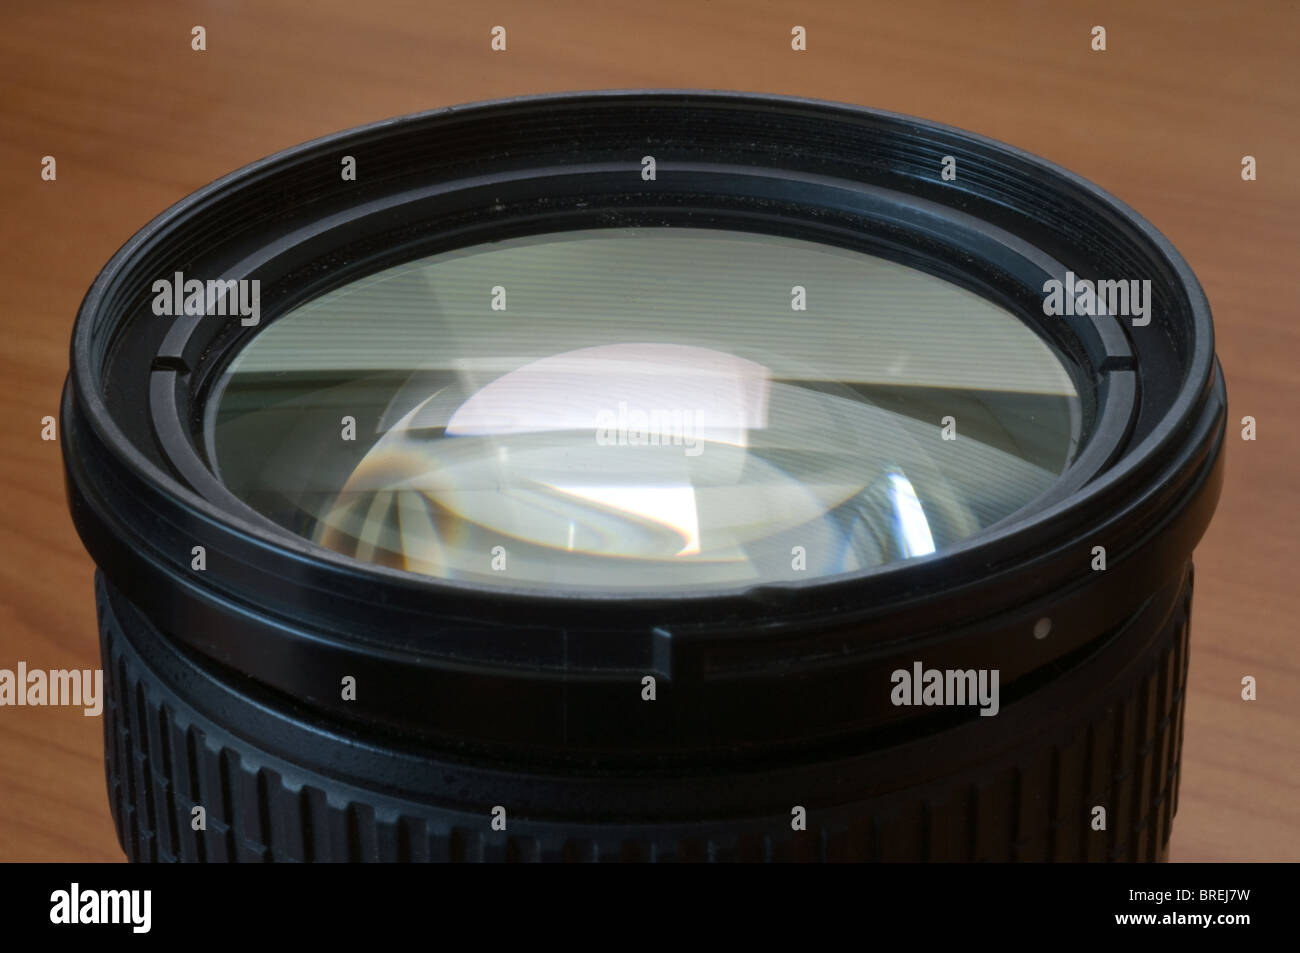 Relections on glass elements of a camera lens. Stock Photo